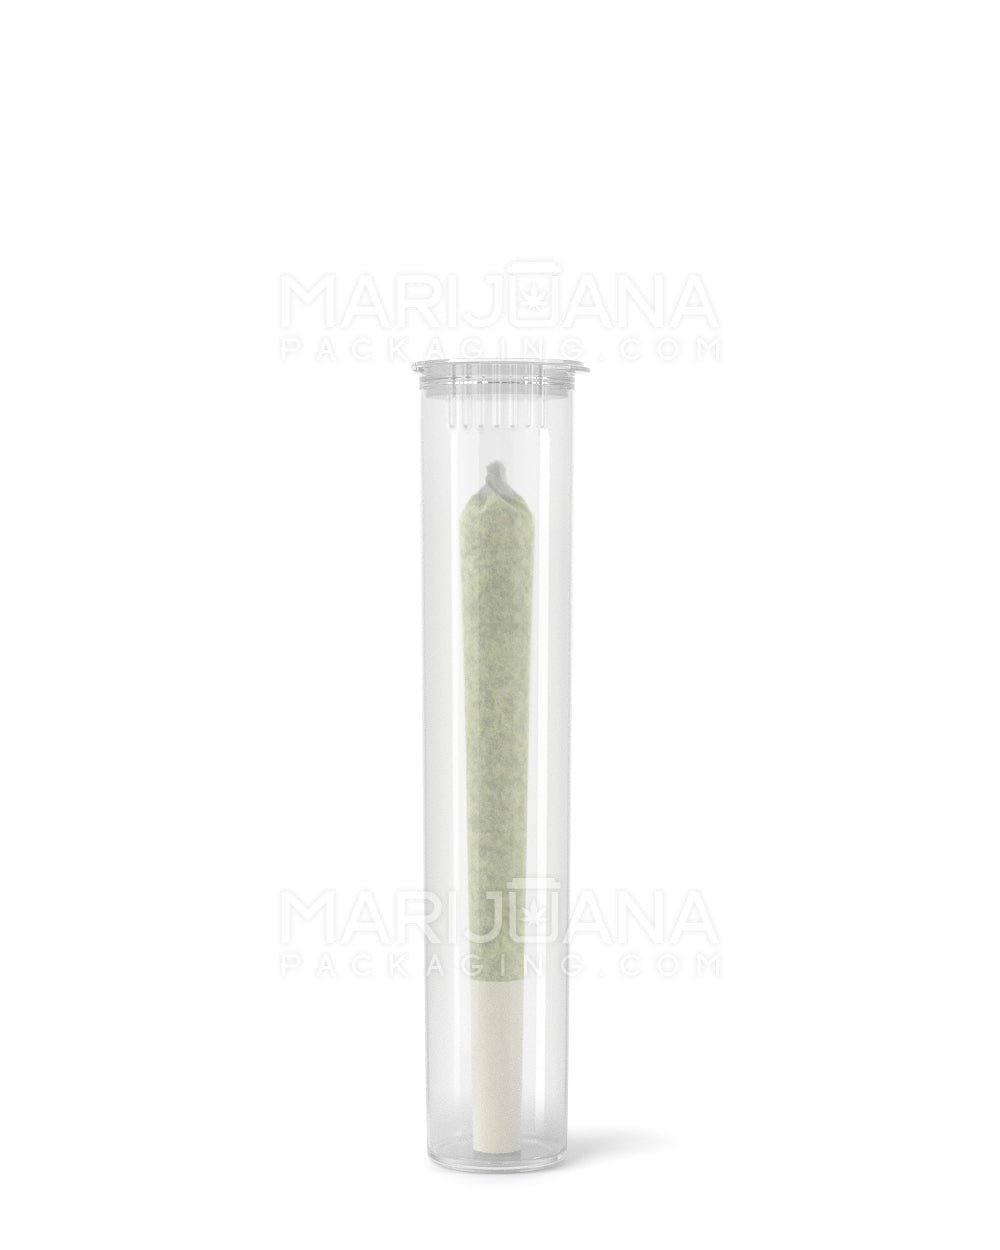 Child Resistant | Pop Top Plastic Pre-Roll Tubes (Open) | 95mm - Clear - 1000 Count - 2